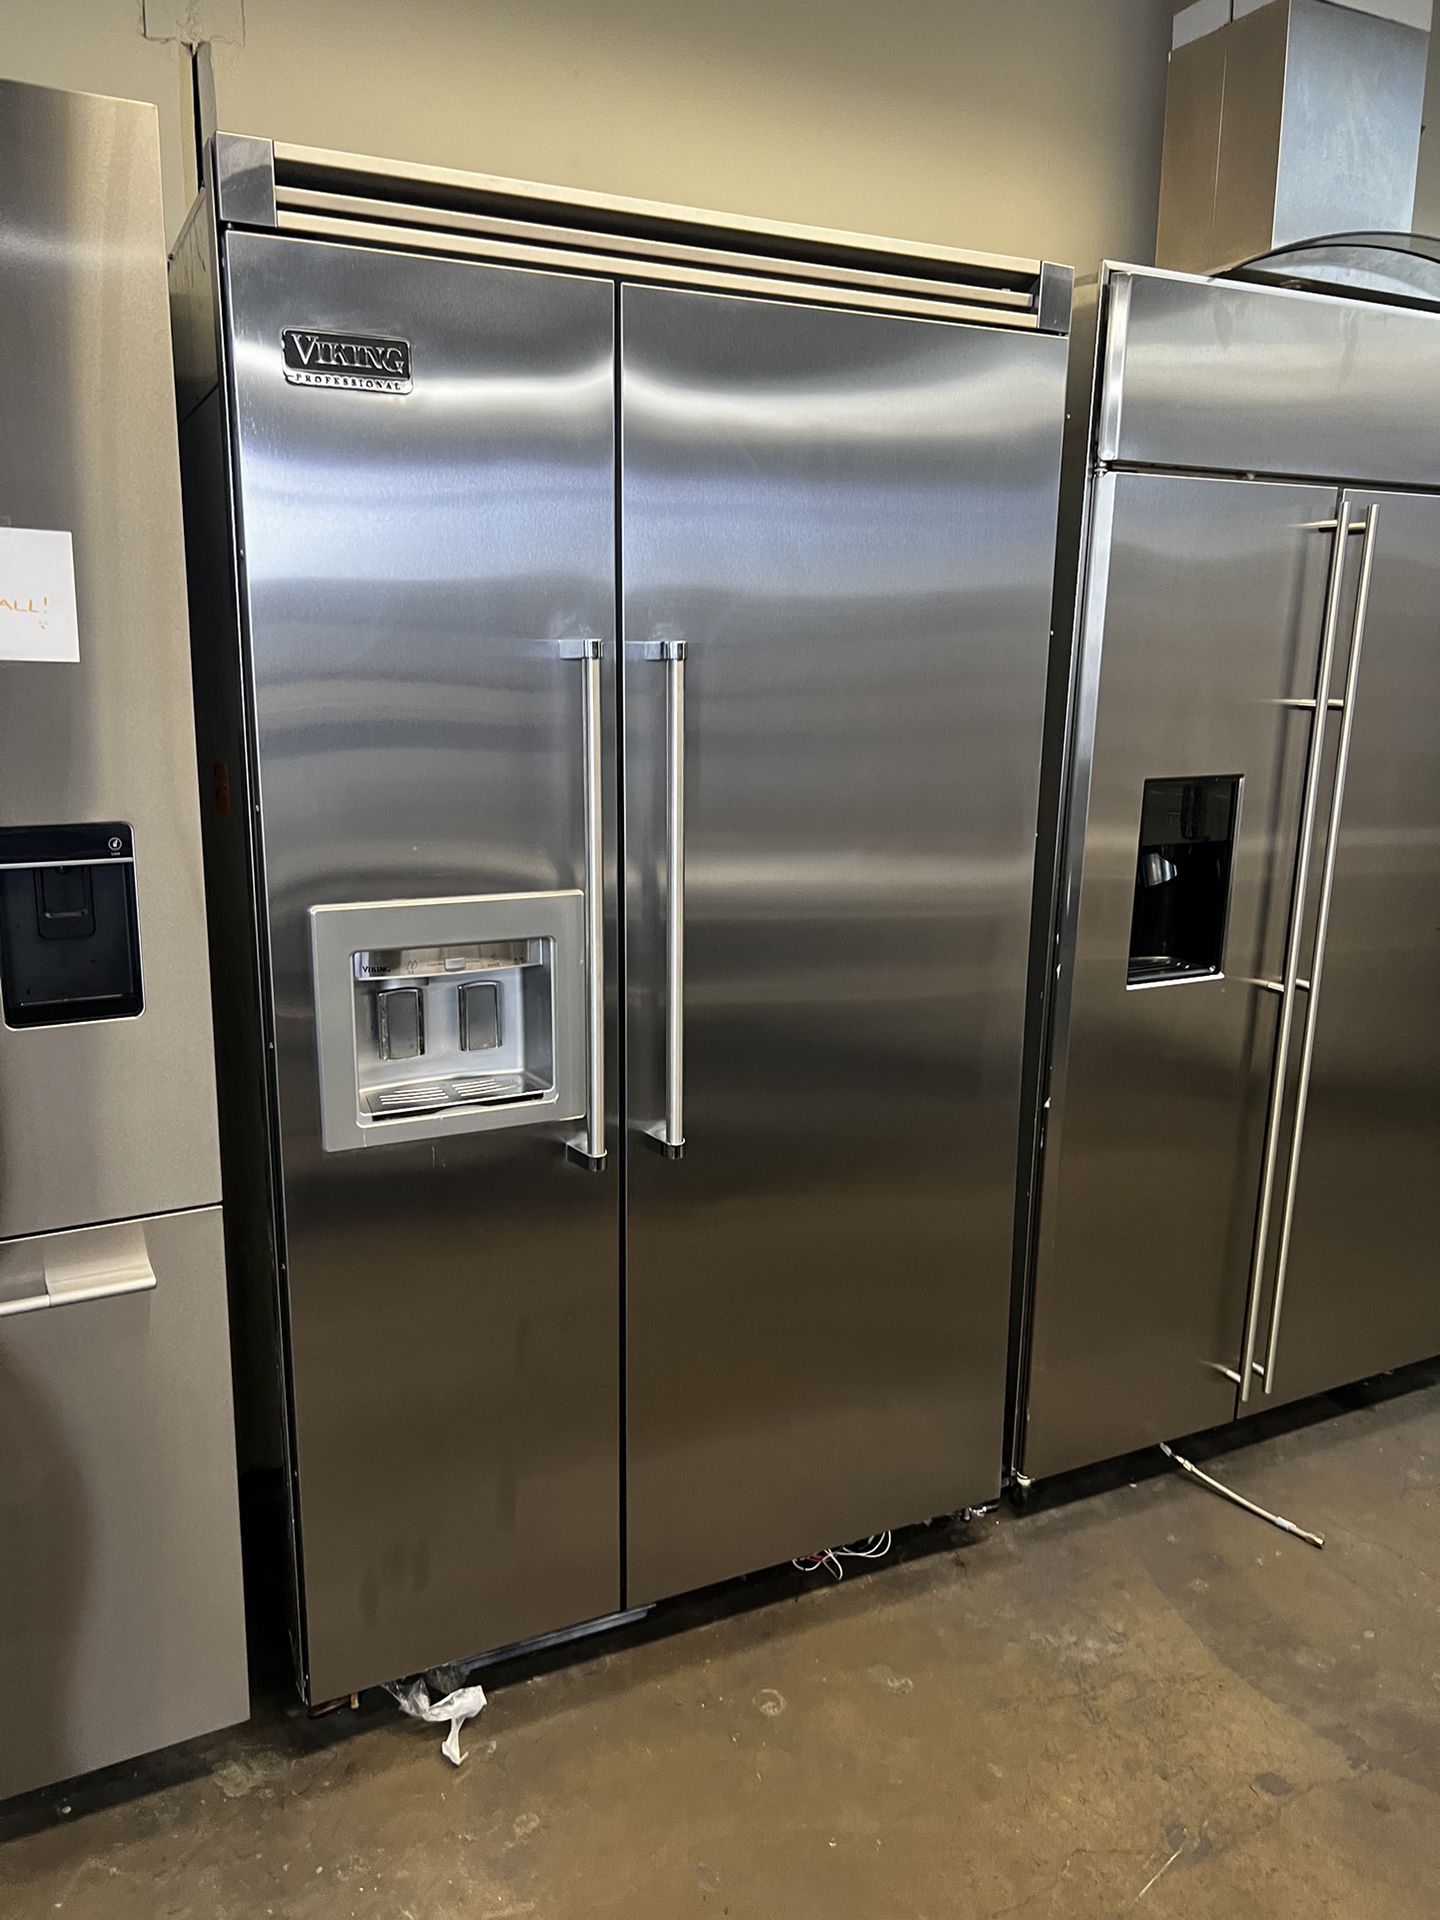 Viking 48”wide Stainless Steel Built In Refrigerator Side By Side 